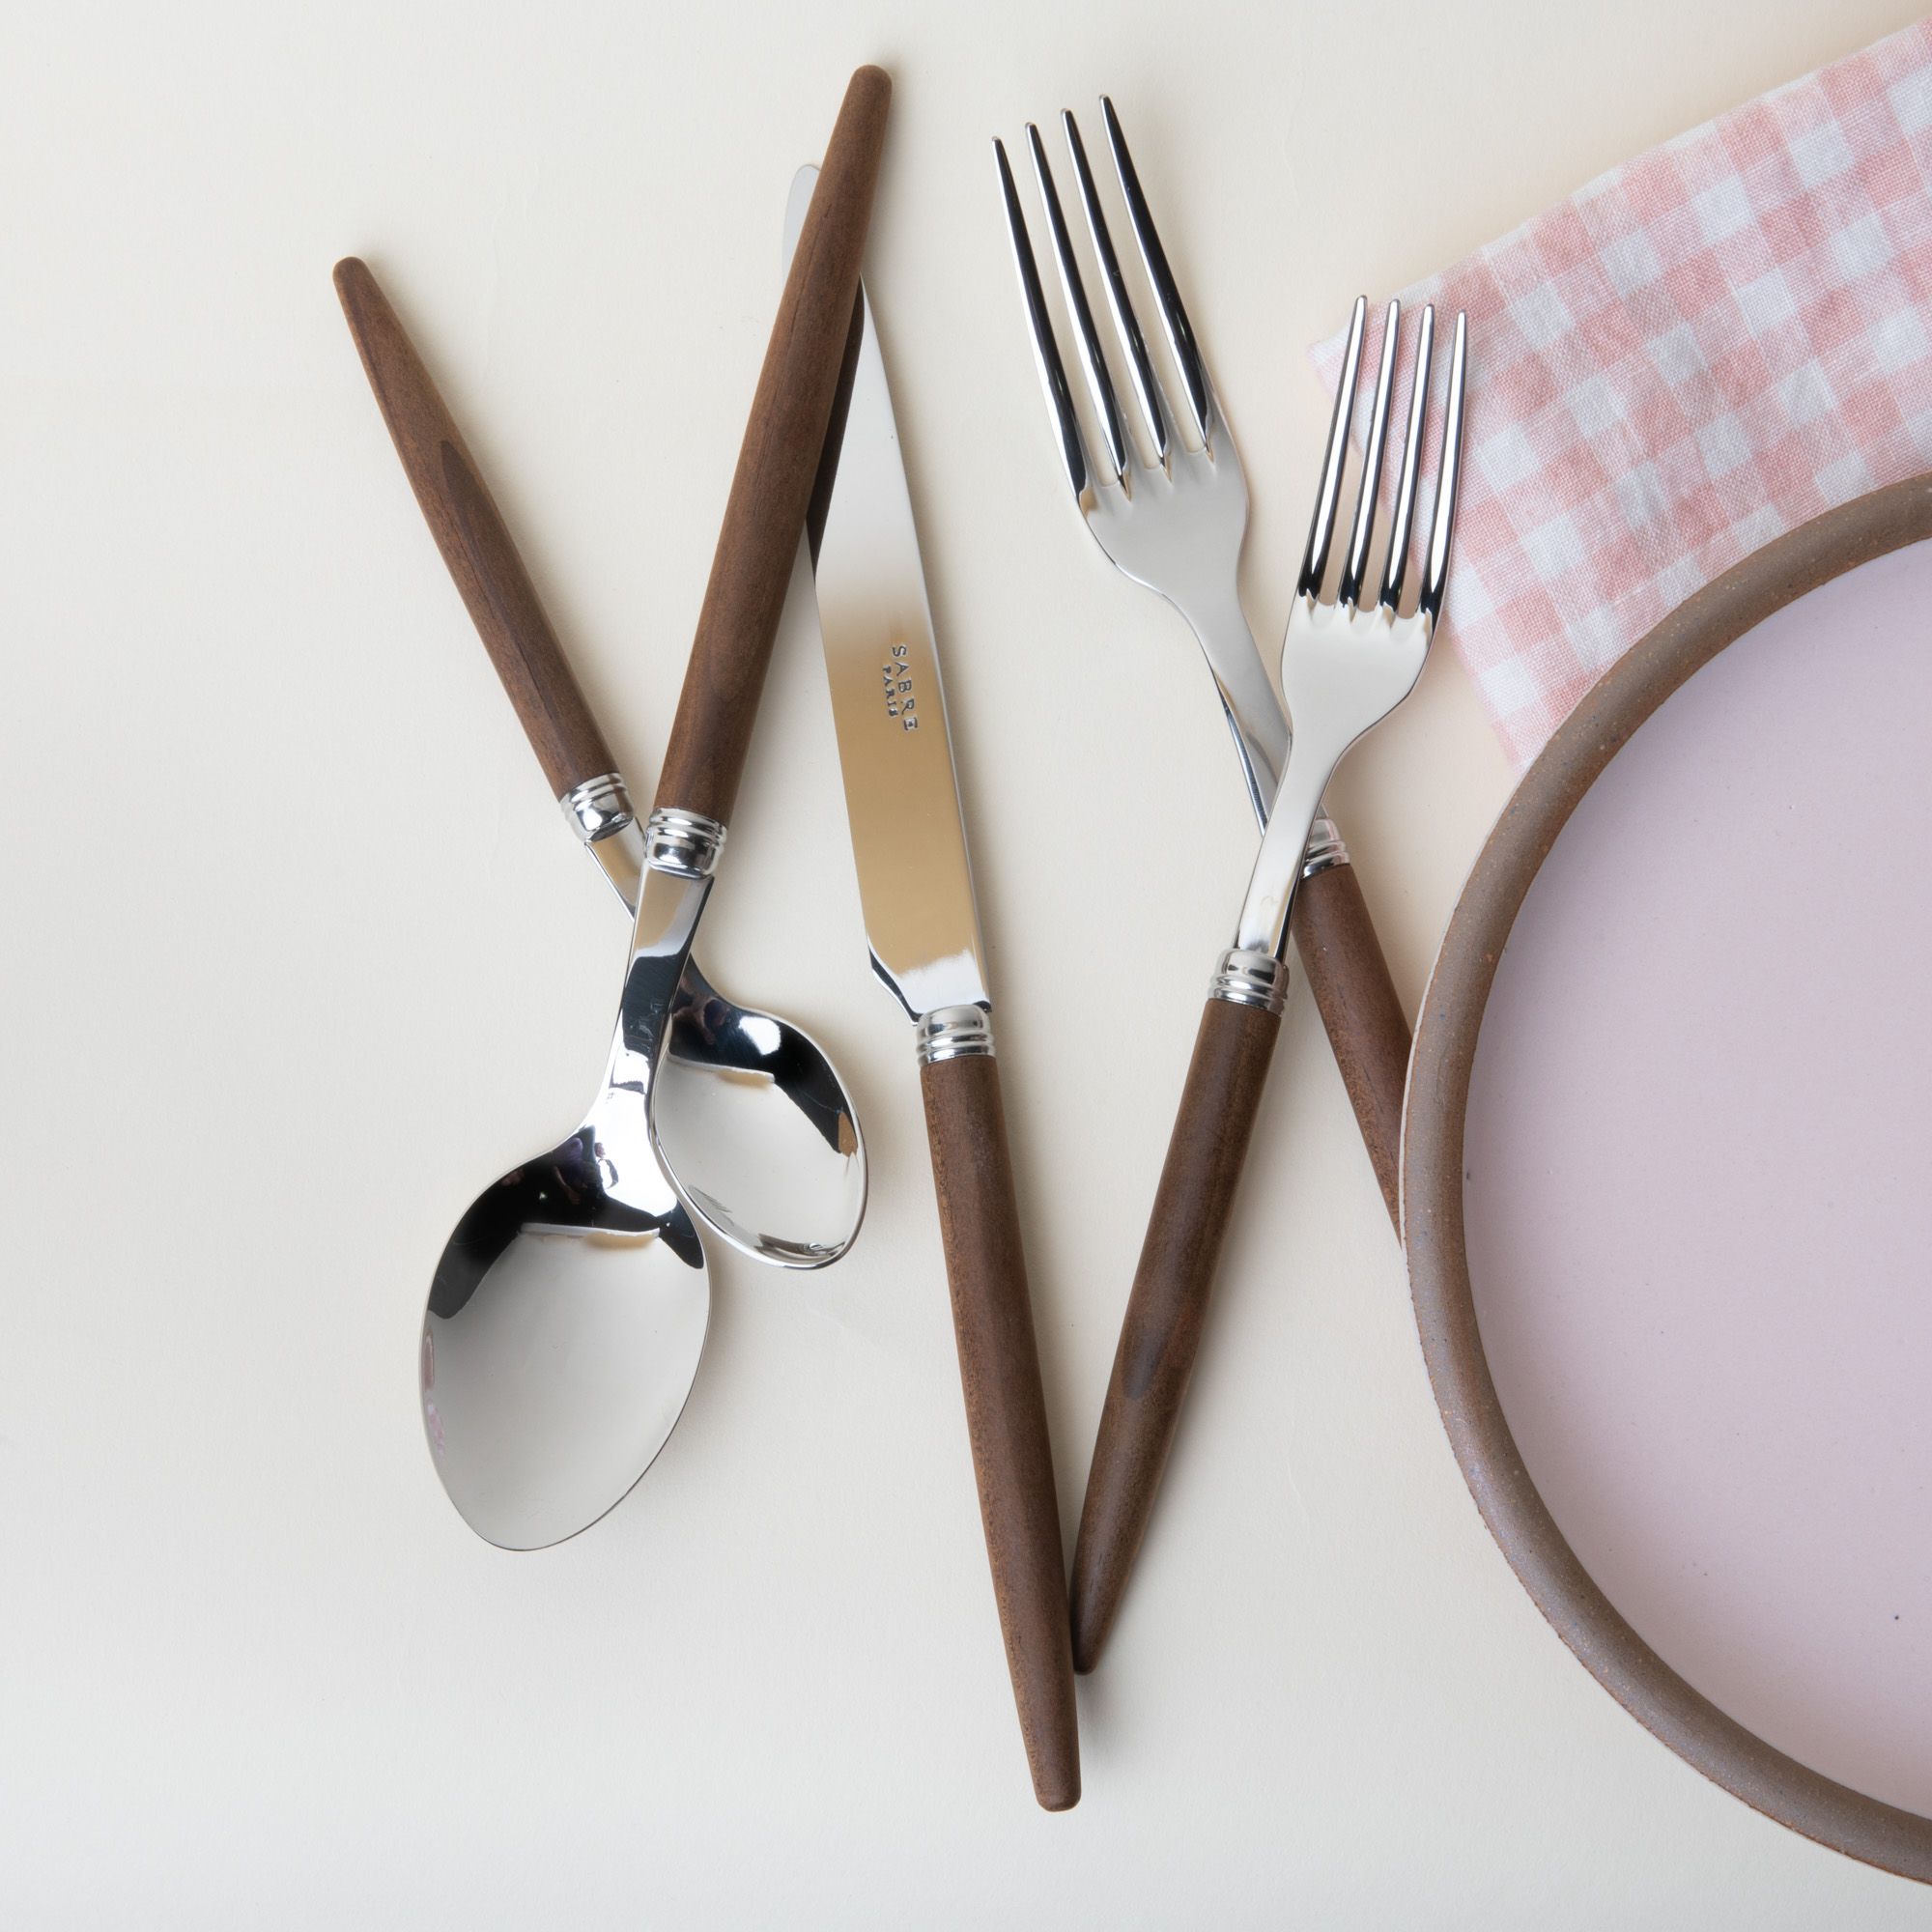 A flatware set of a salad fork, dinner fork, spoon, teaspoon, and knife - all with steel top and simple wood handles. Sitting next to a baby pink plate and a pink and white gingham napkin.